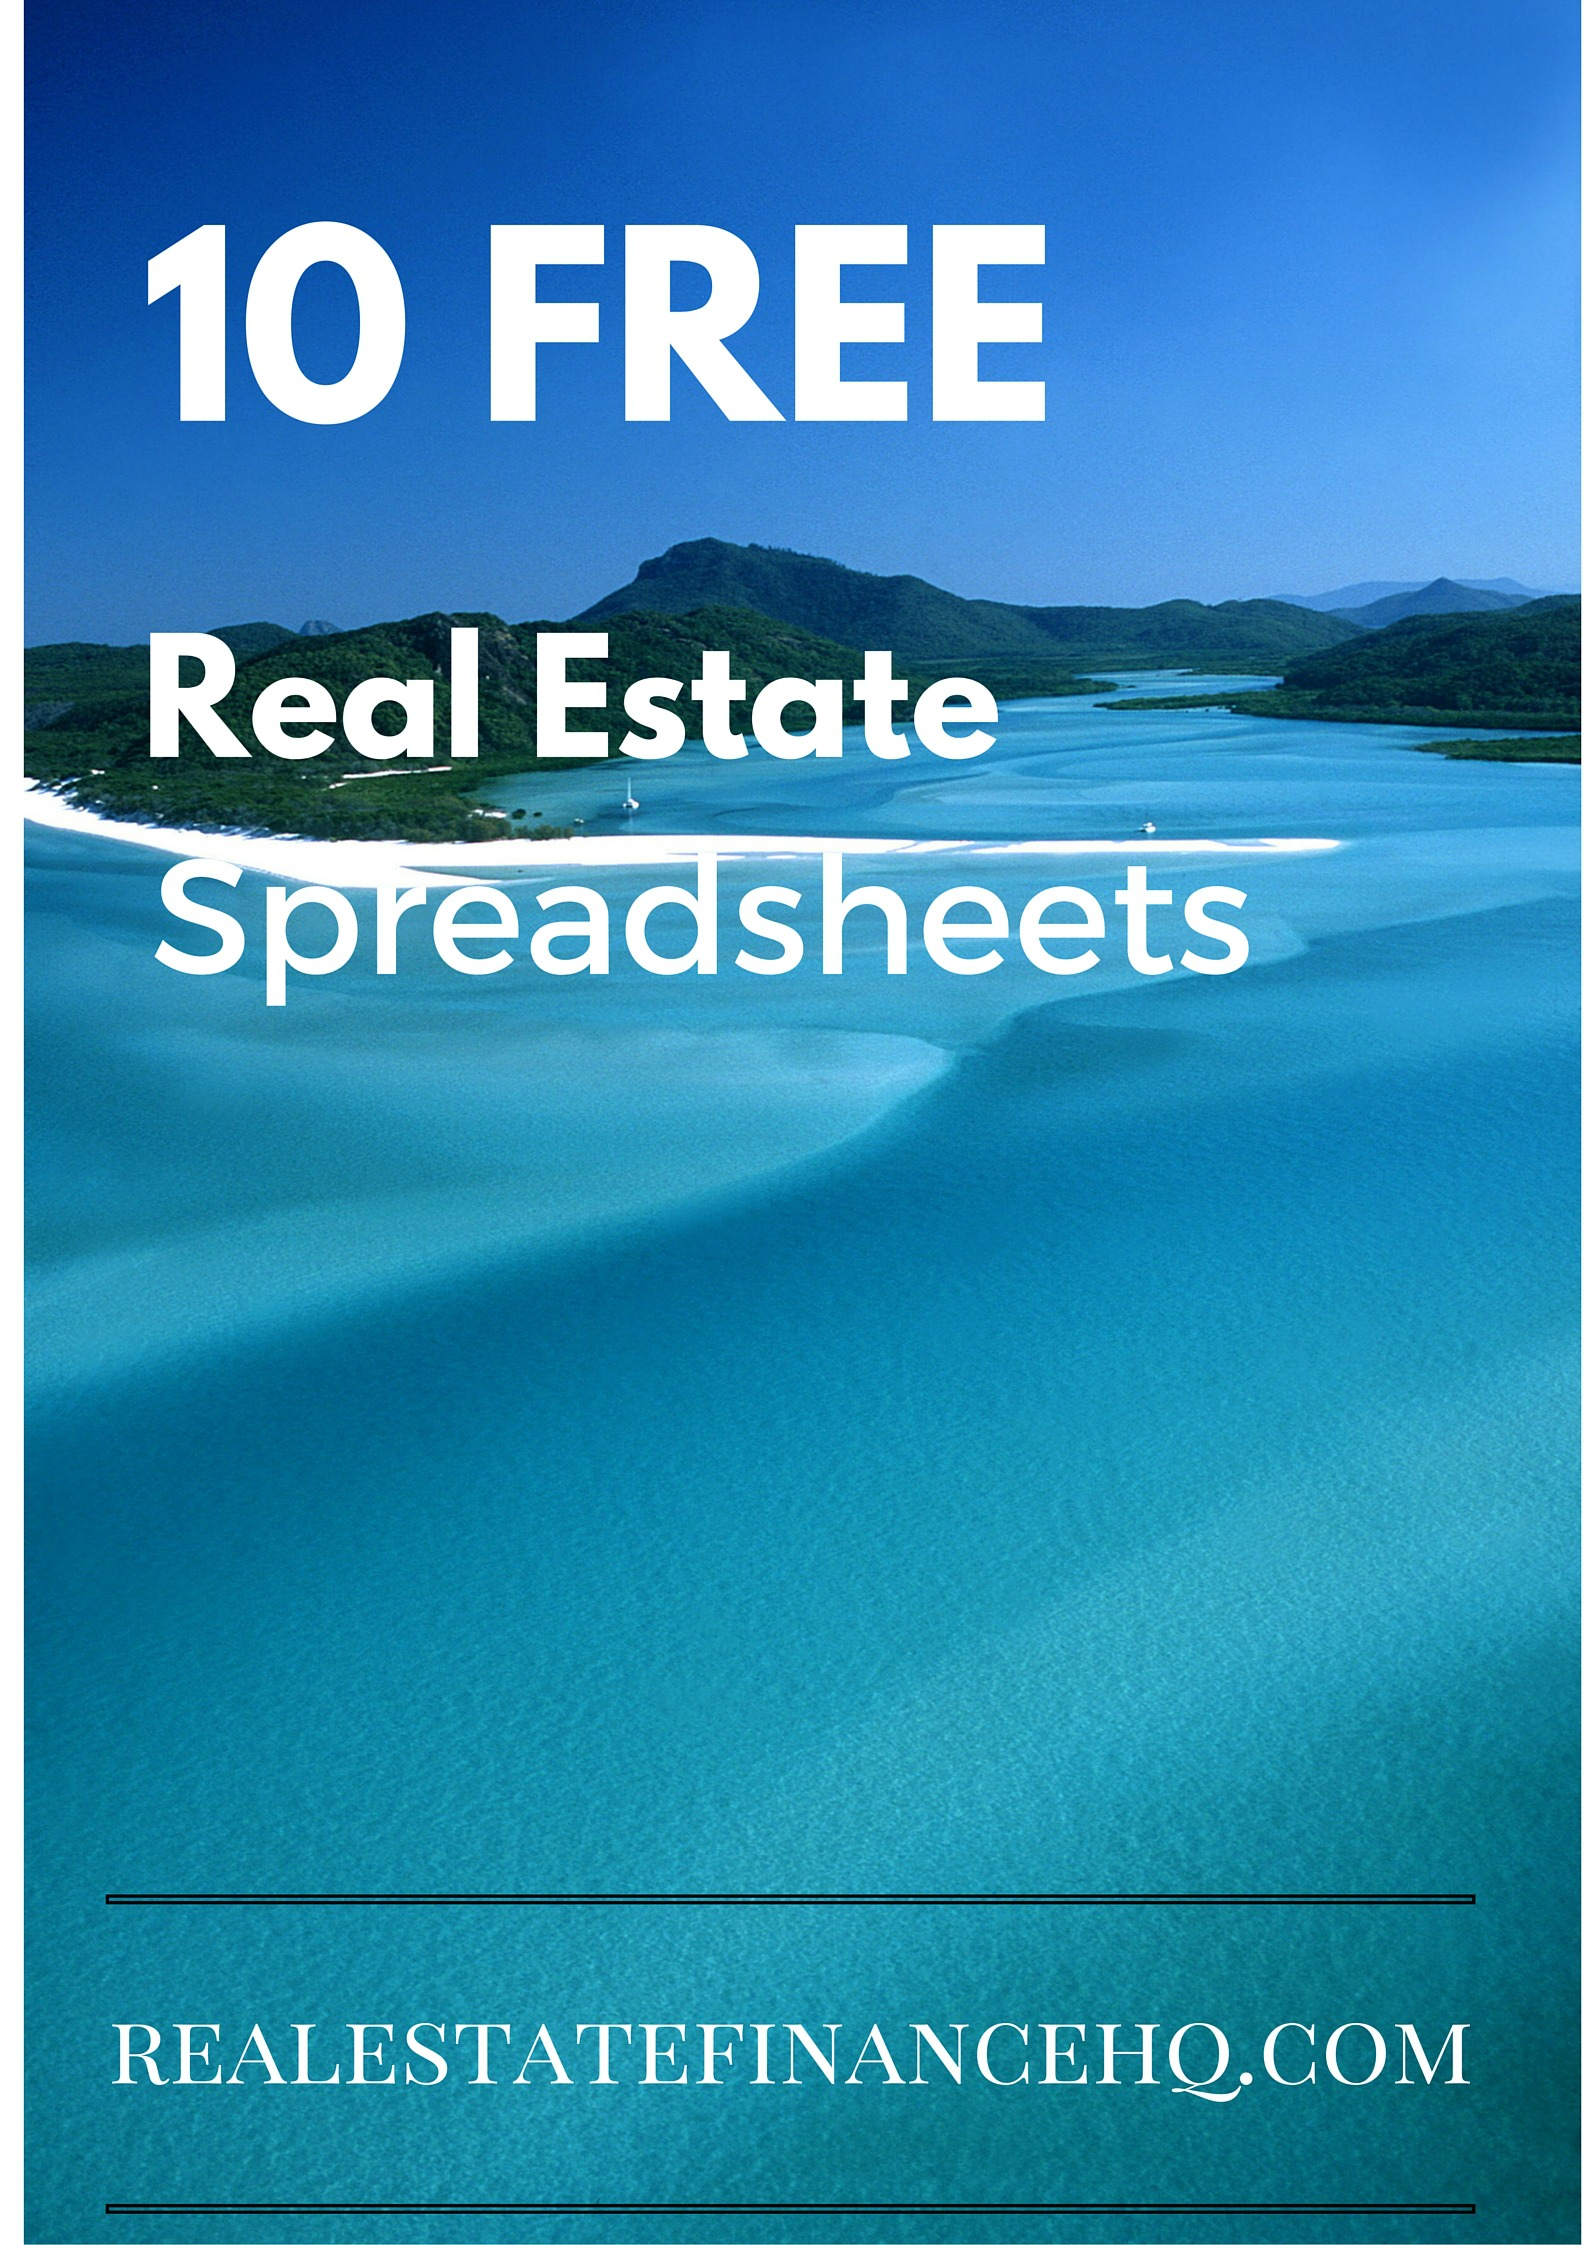 Excel Spreadsheet For Real Estate Investment With 10 Free Real Estate Spreadsheets  Real Estate Finance